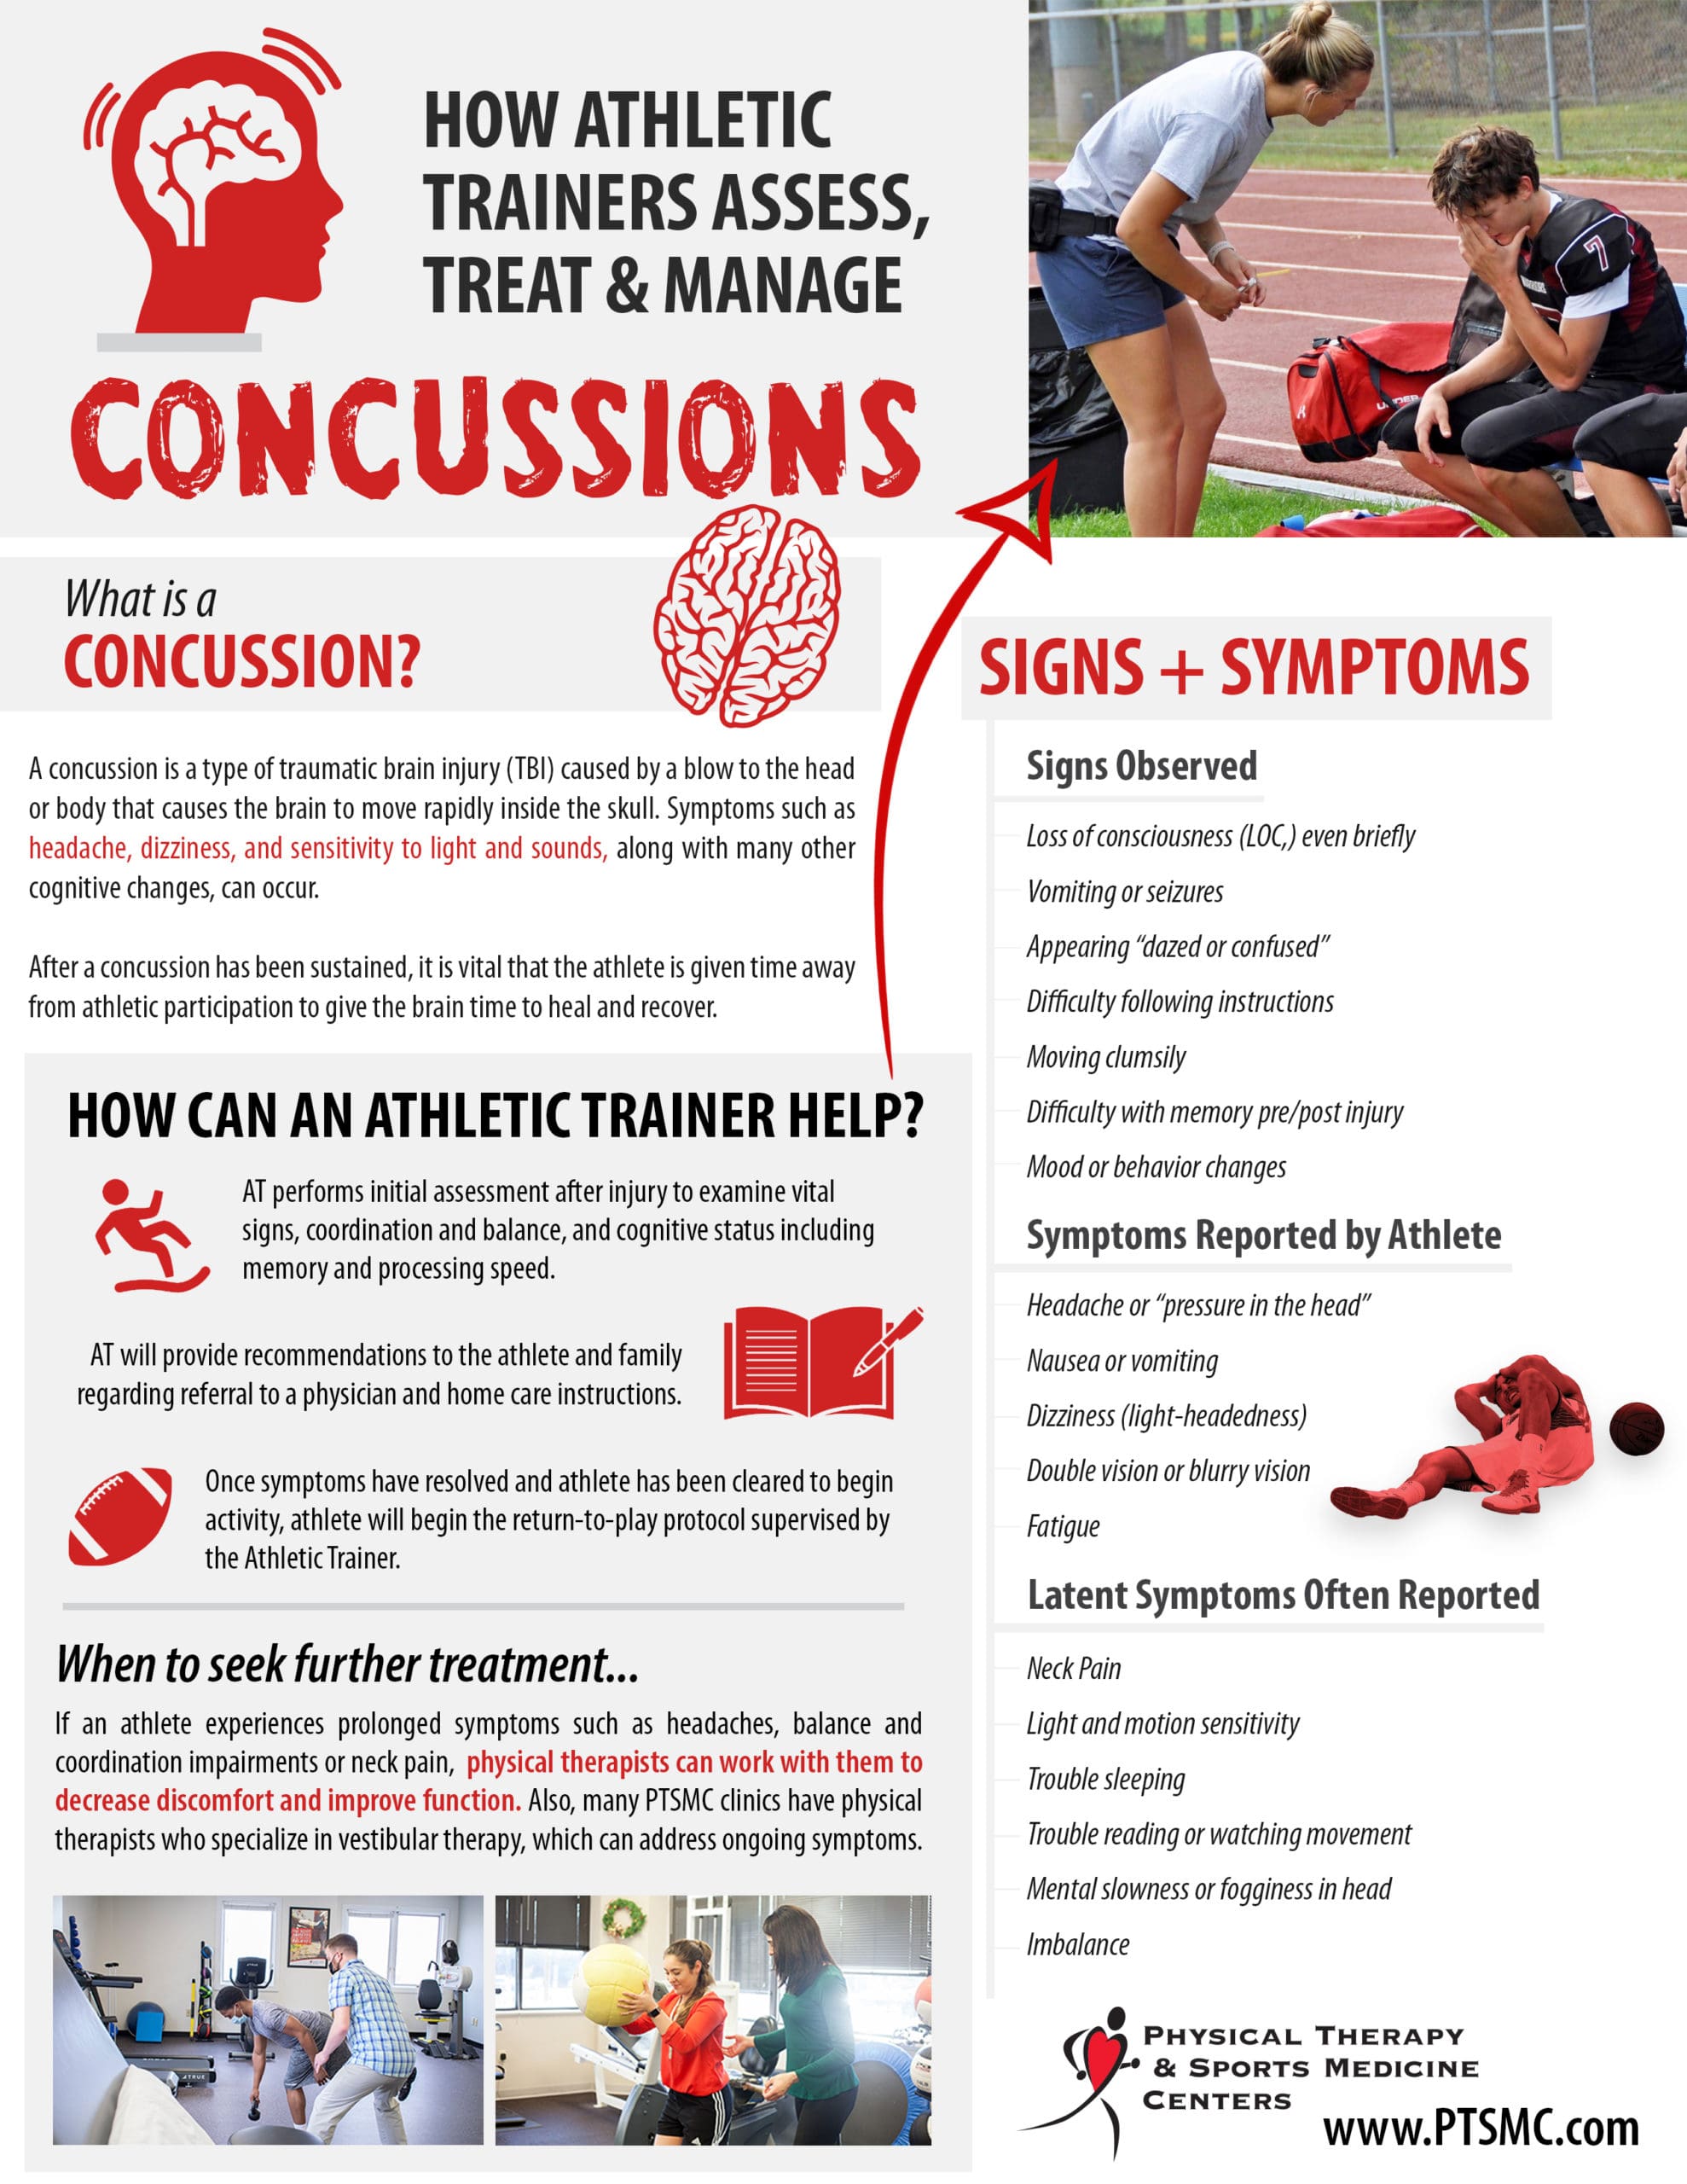 atheltic trainers assessing concussions